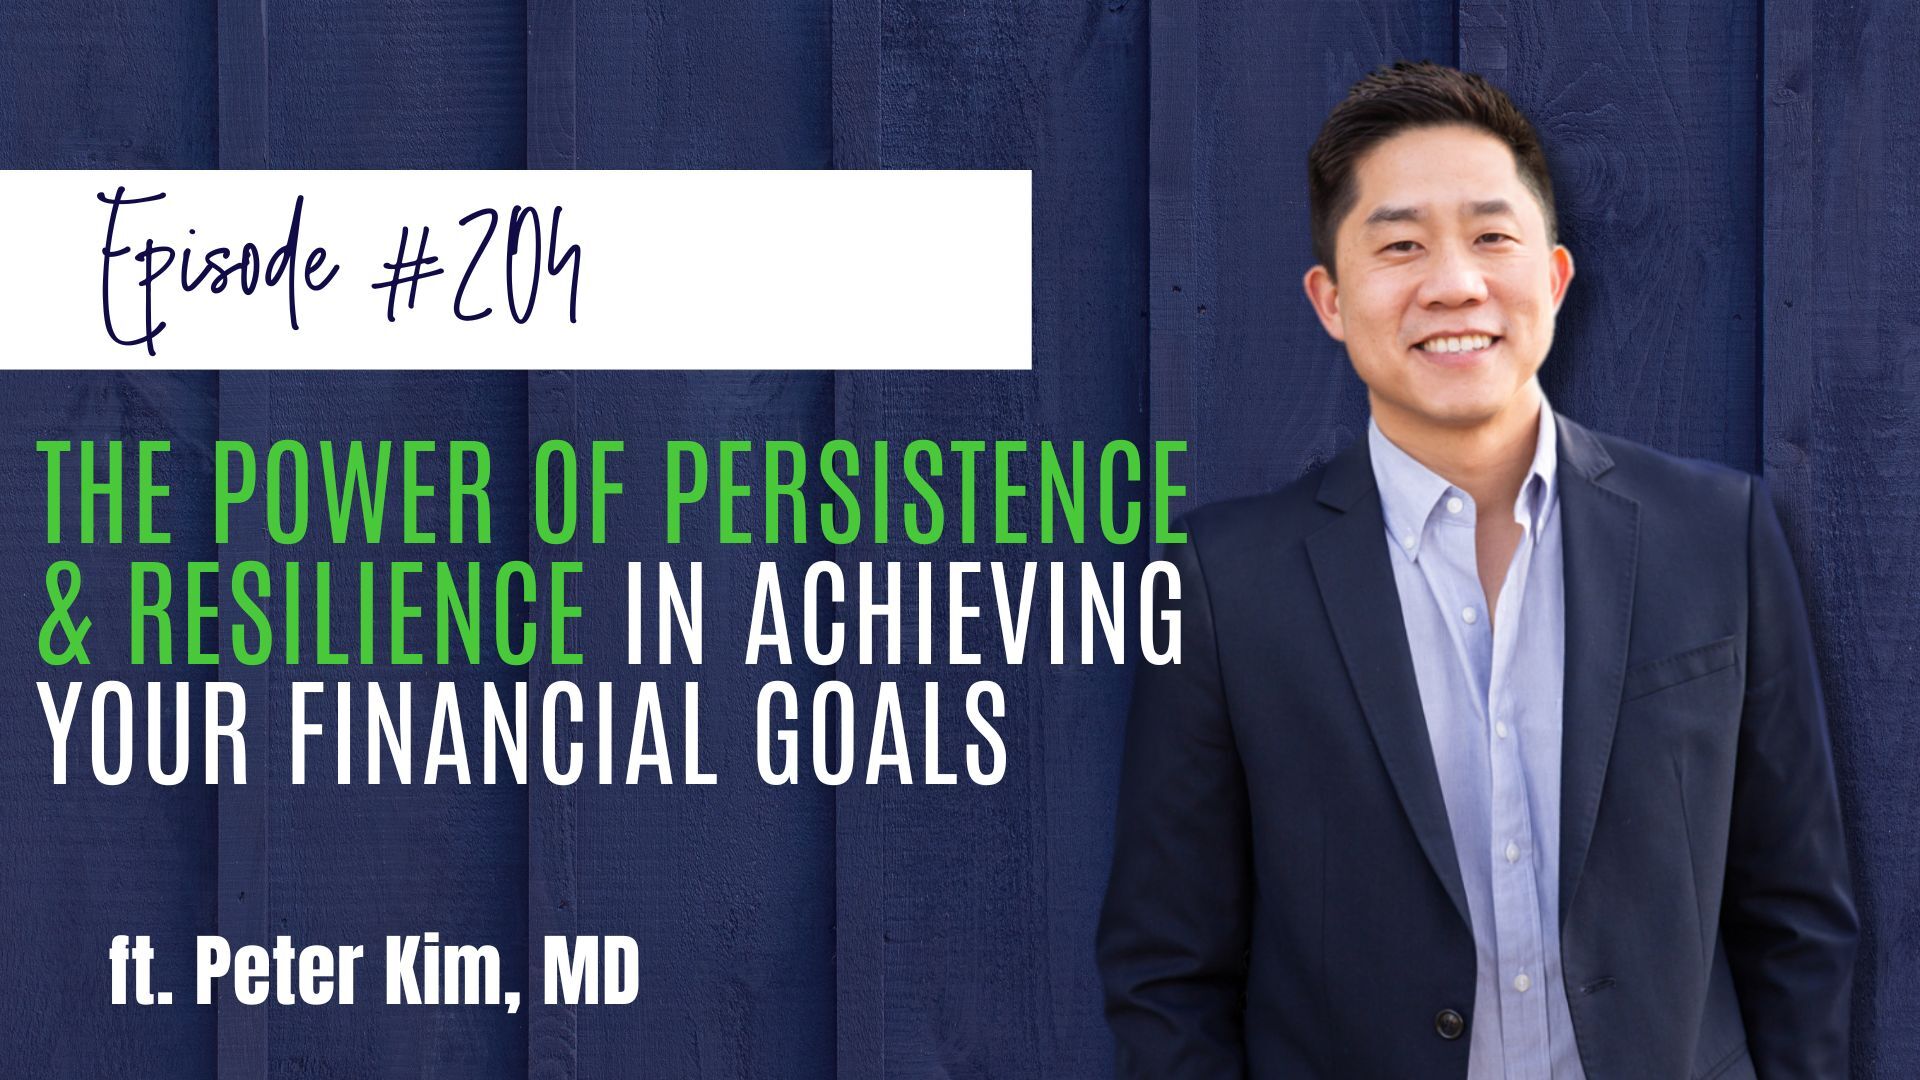 #204 The Power of Persistence & Resilience in Achieving Your Financial Goals ft. Dr. Peter Kim